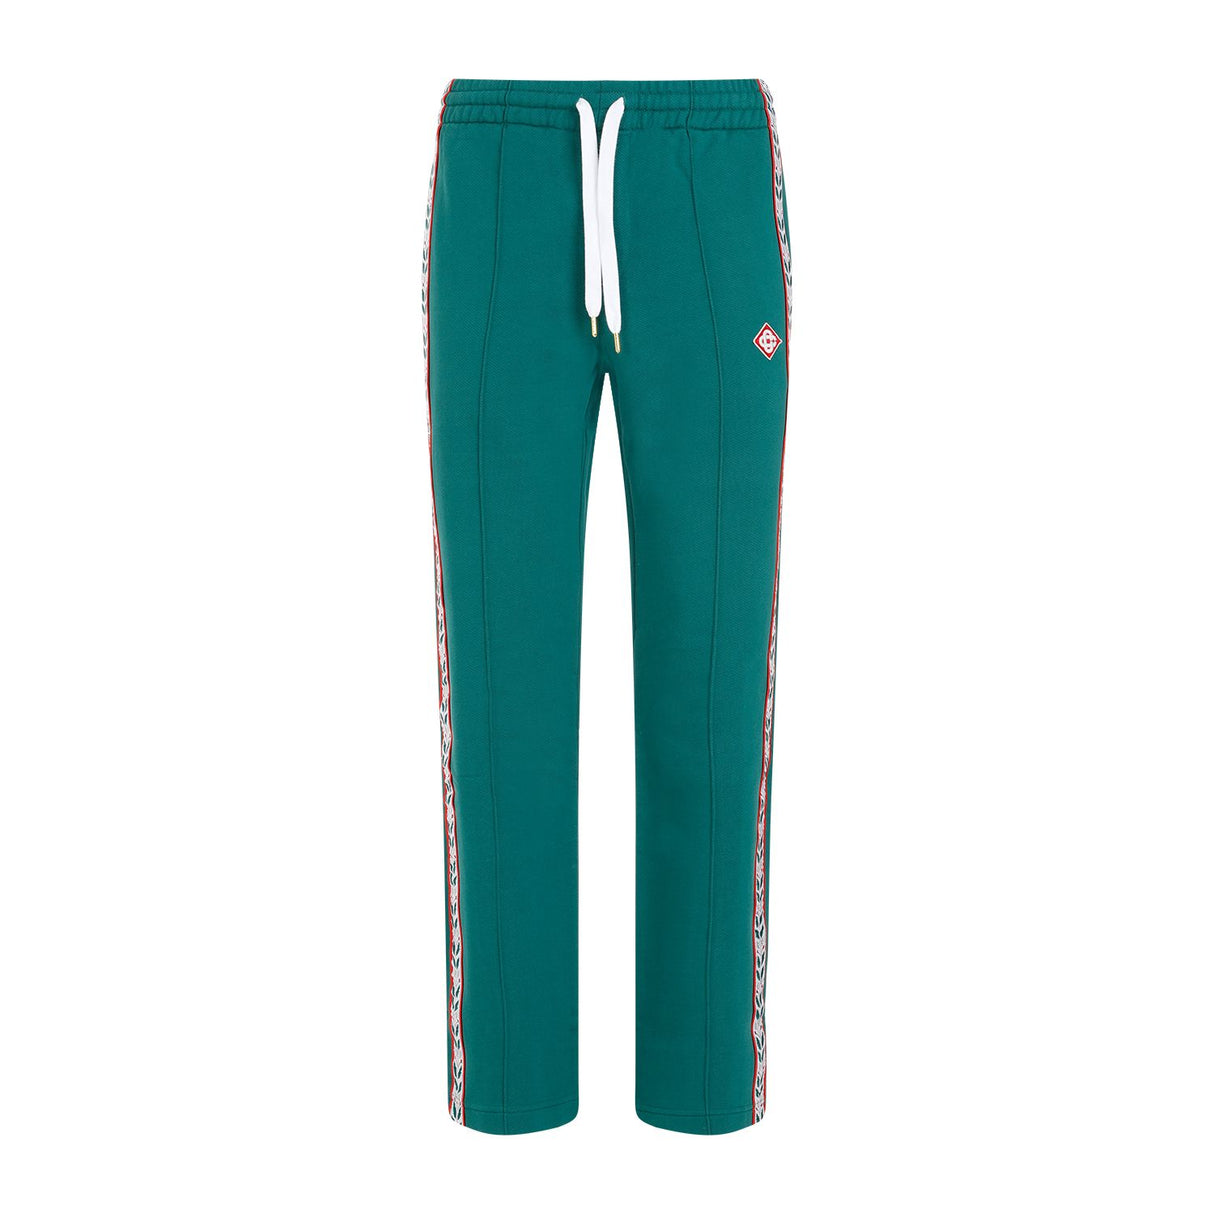 CASABLANCA Green Tapered Joggers for Men - 100% Organic Cotton